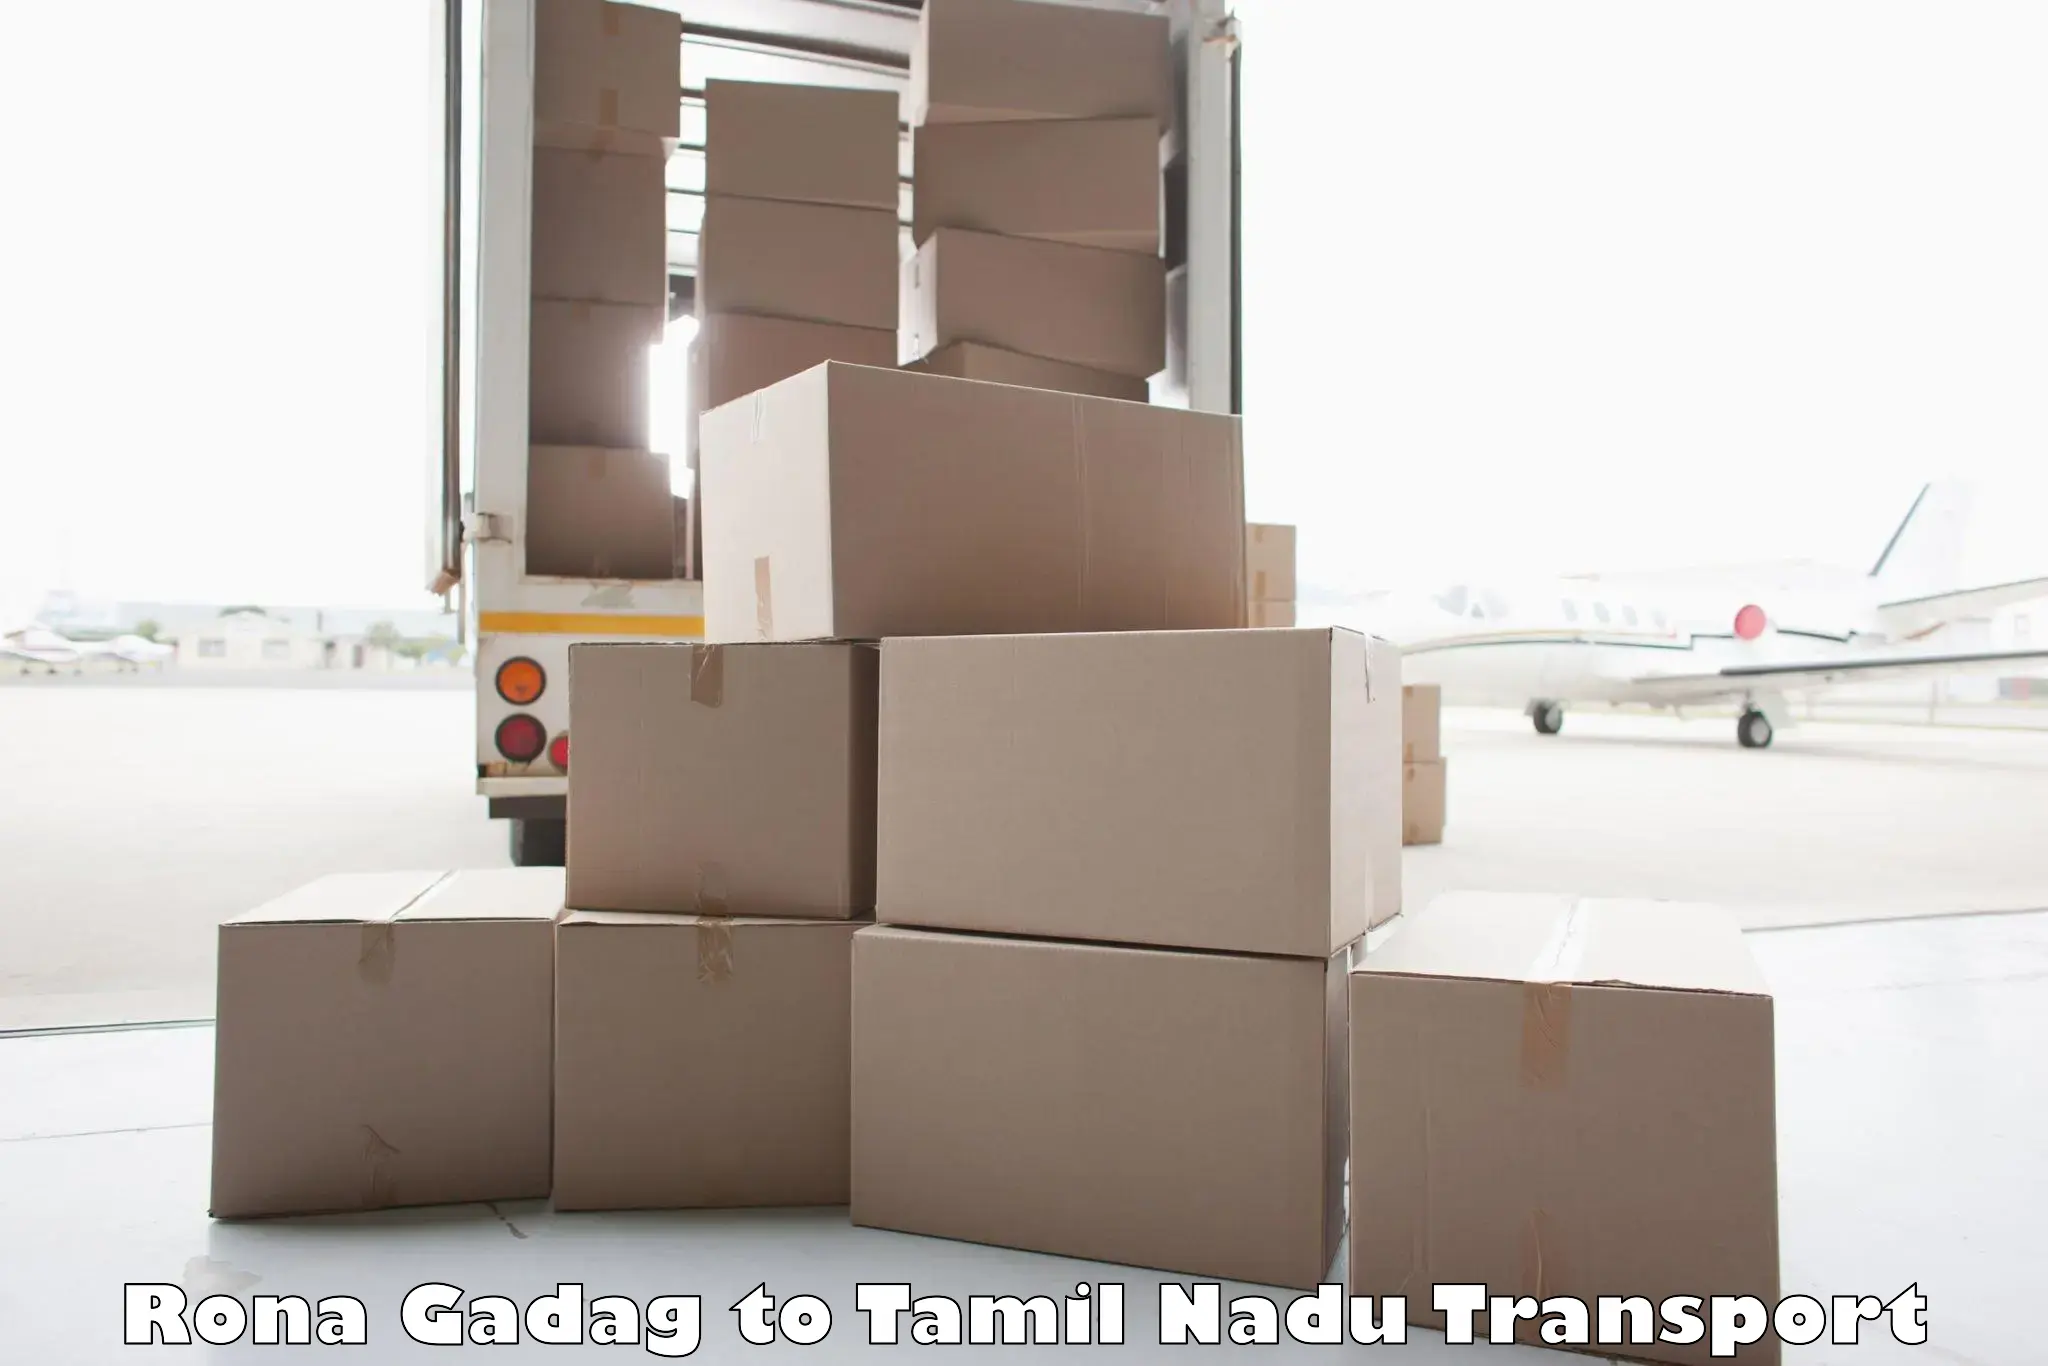 Container transport service Rona Gadag to Sri Ramachandra Institute of Higher Education and Research Chennai